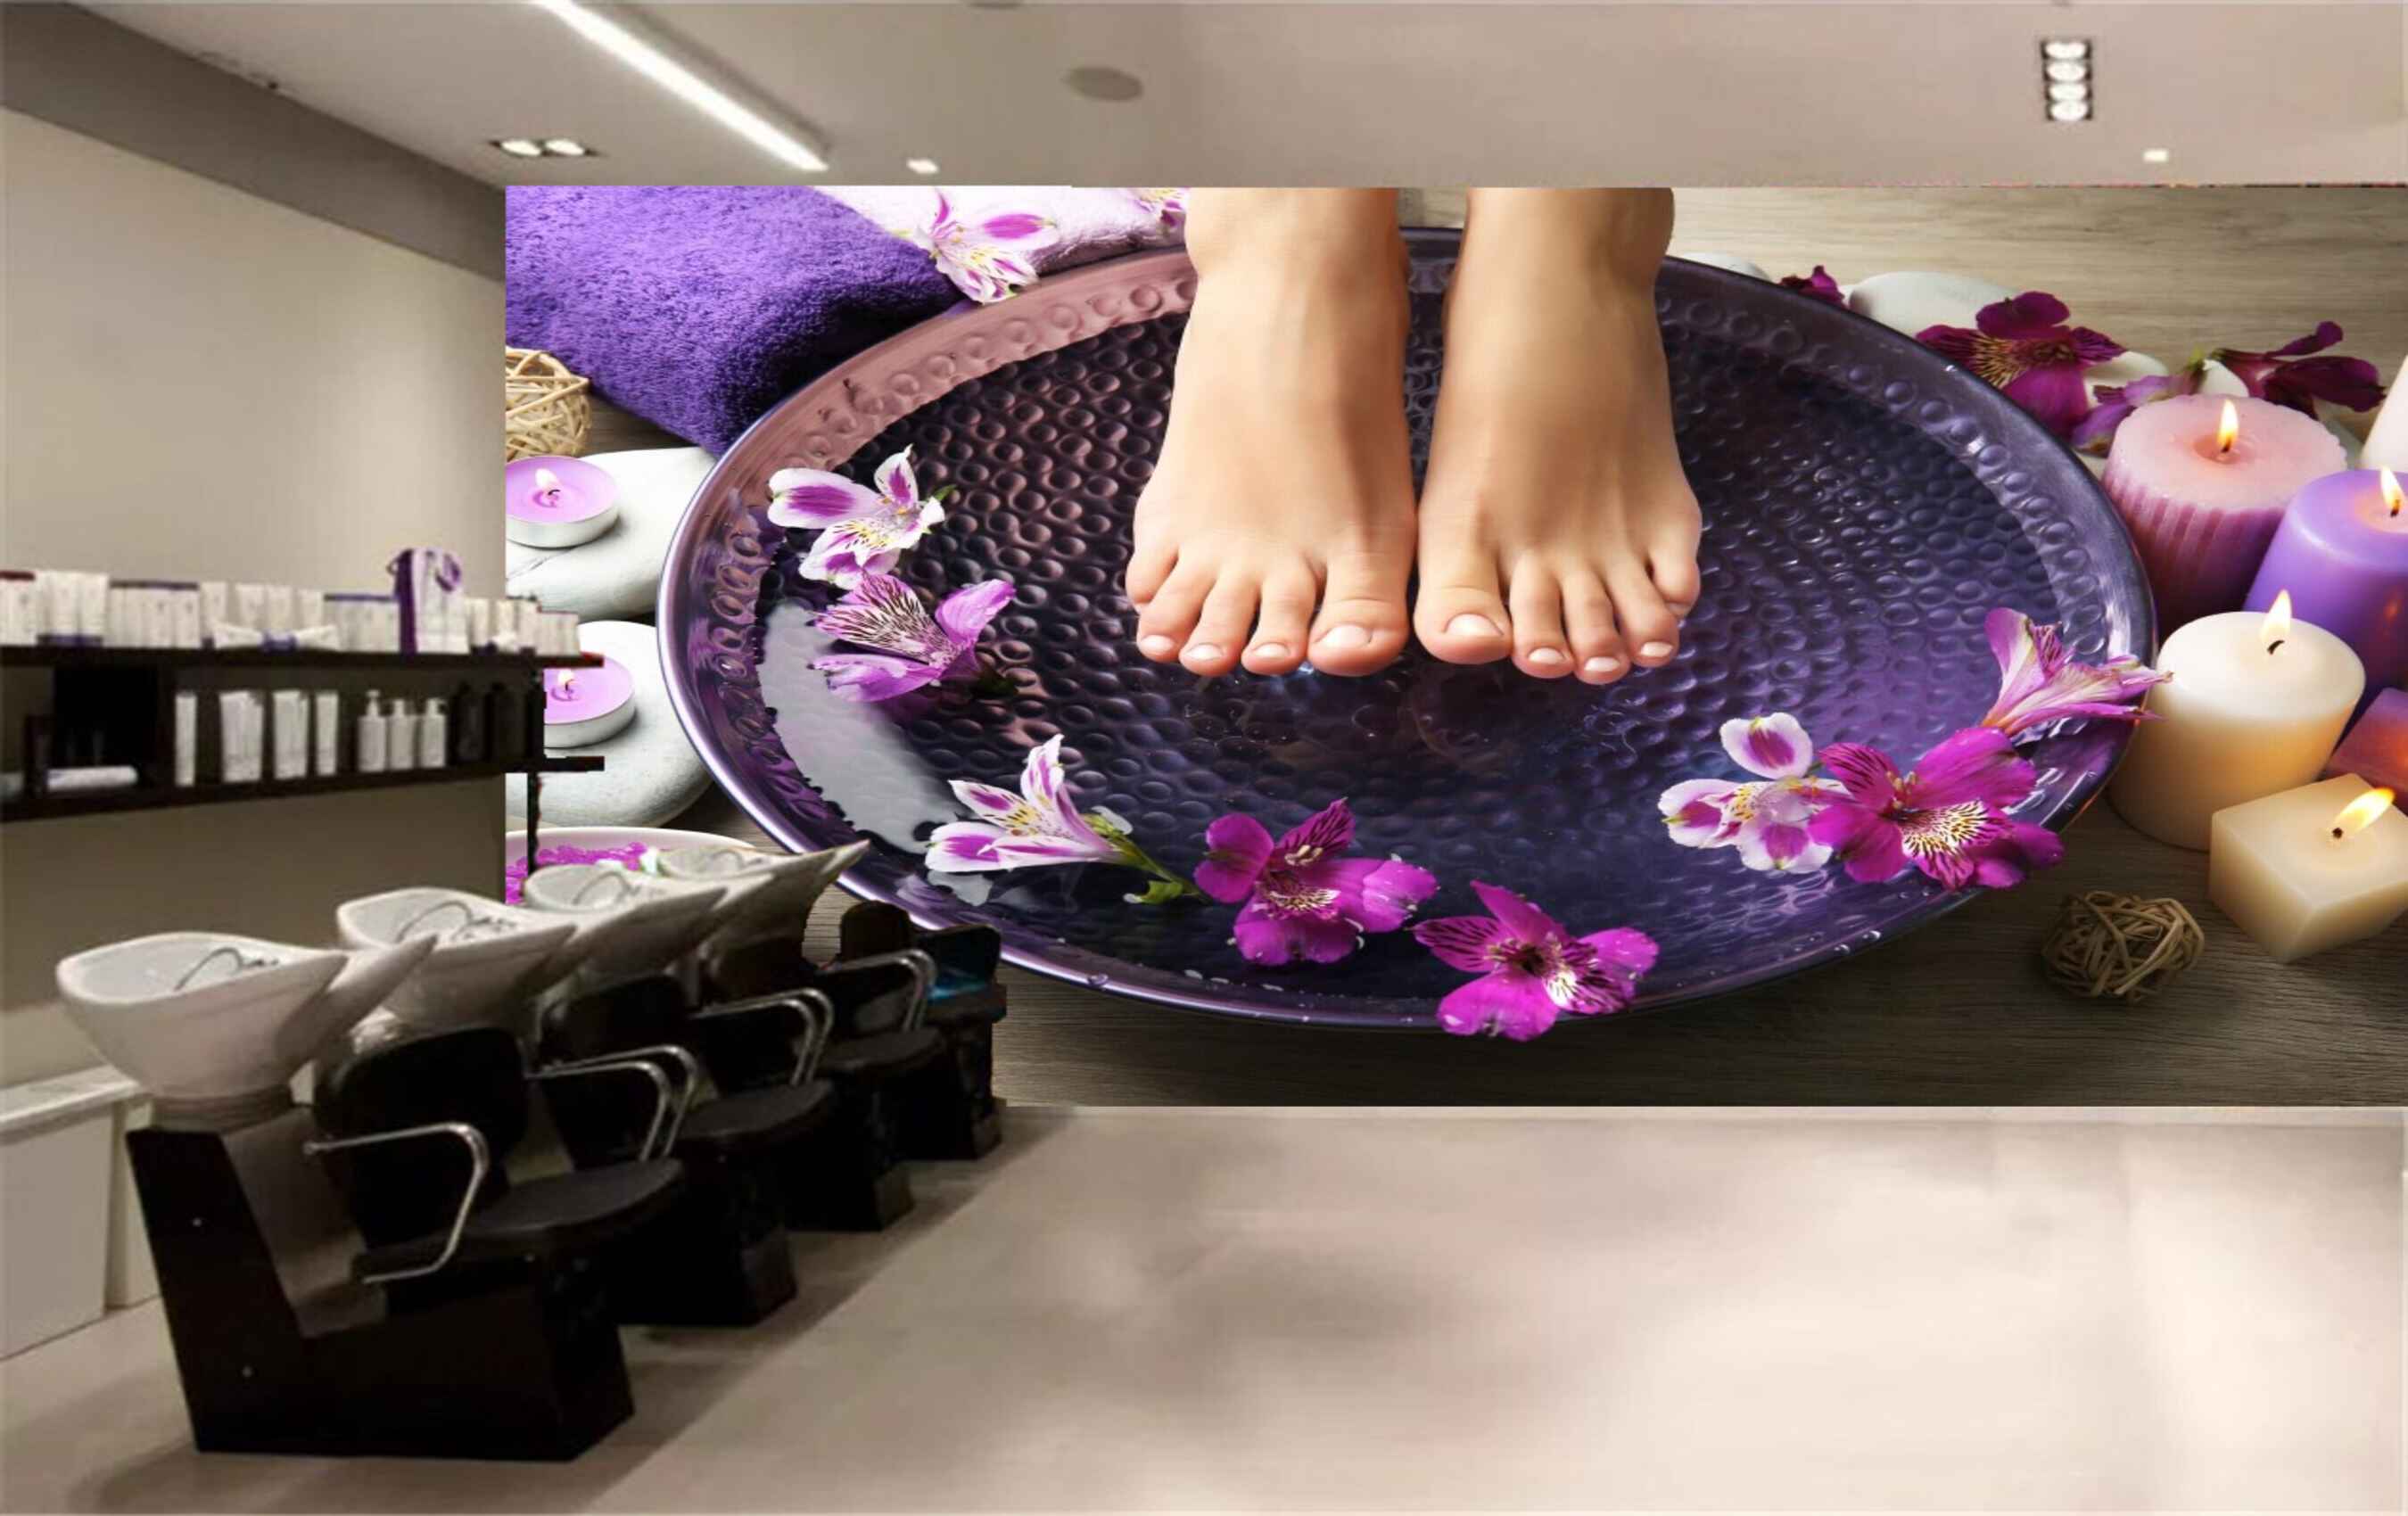 Avikalp MWZ3753 Feet Cleaning Bowl Flowers Candles Stones HD Wallpaper for Spa